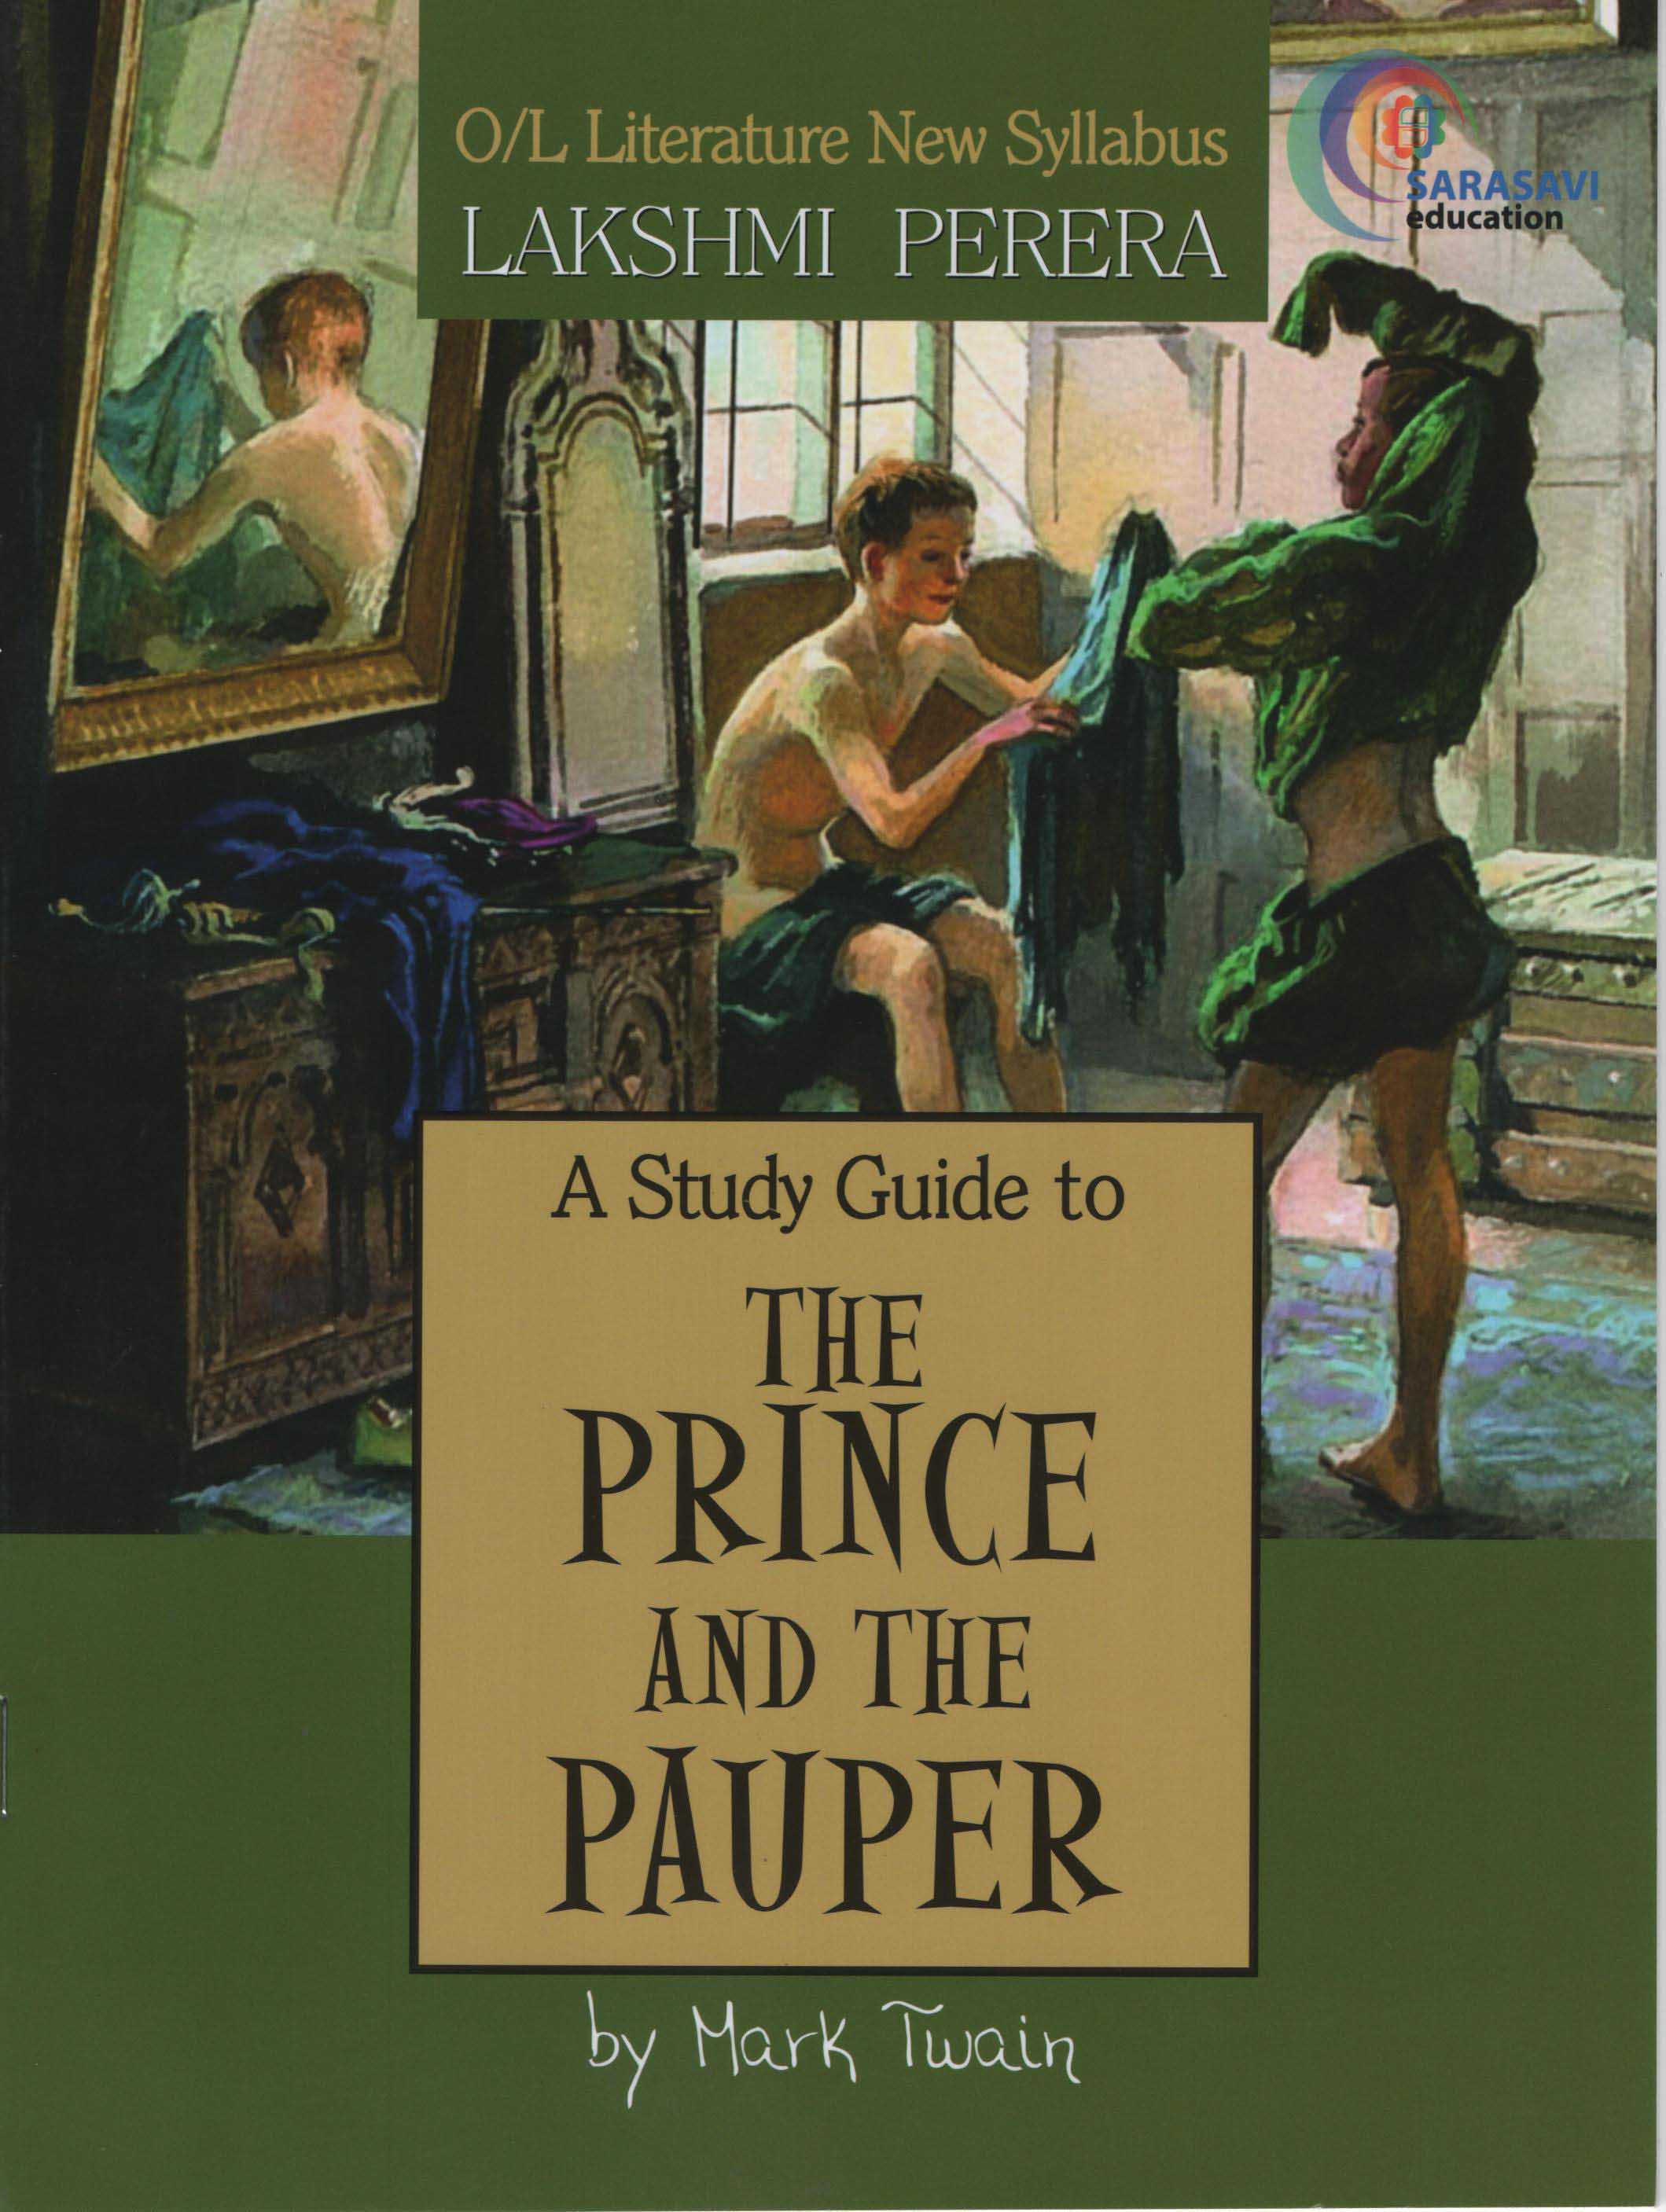 A Study Guide to The Prince and the Pauper